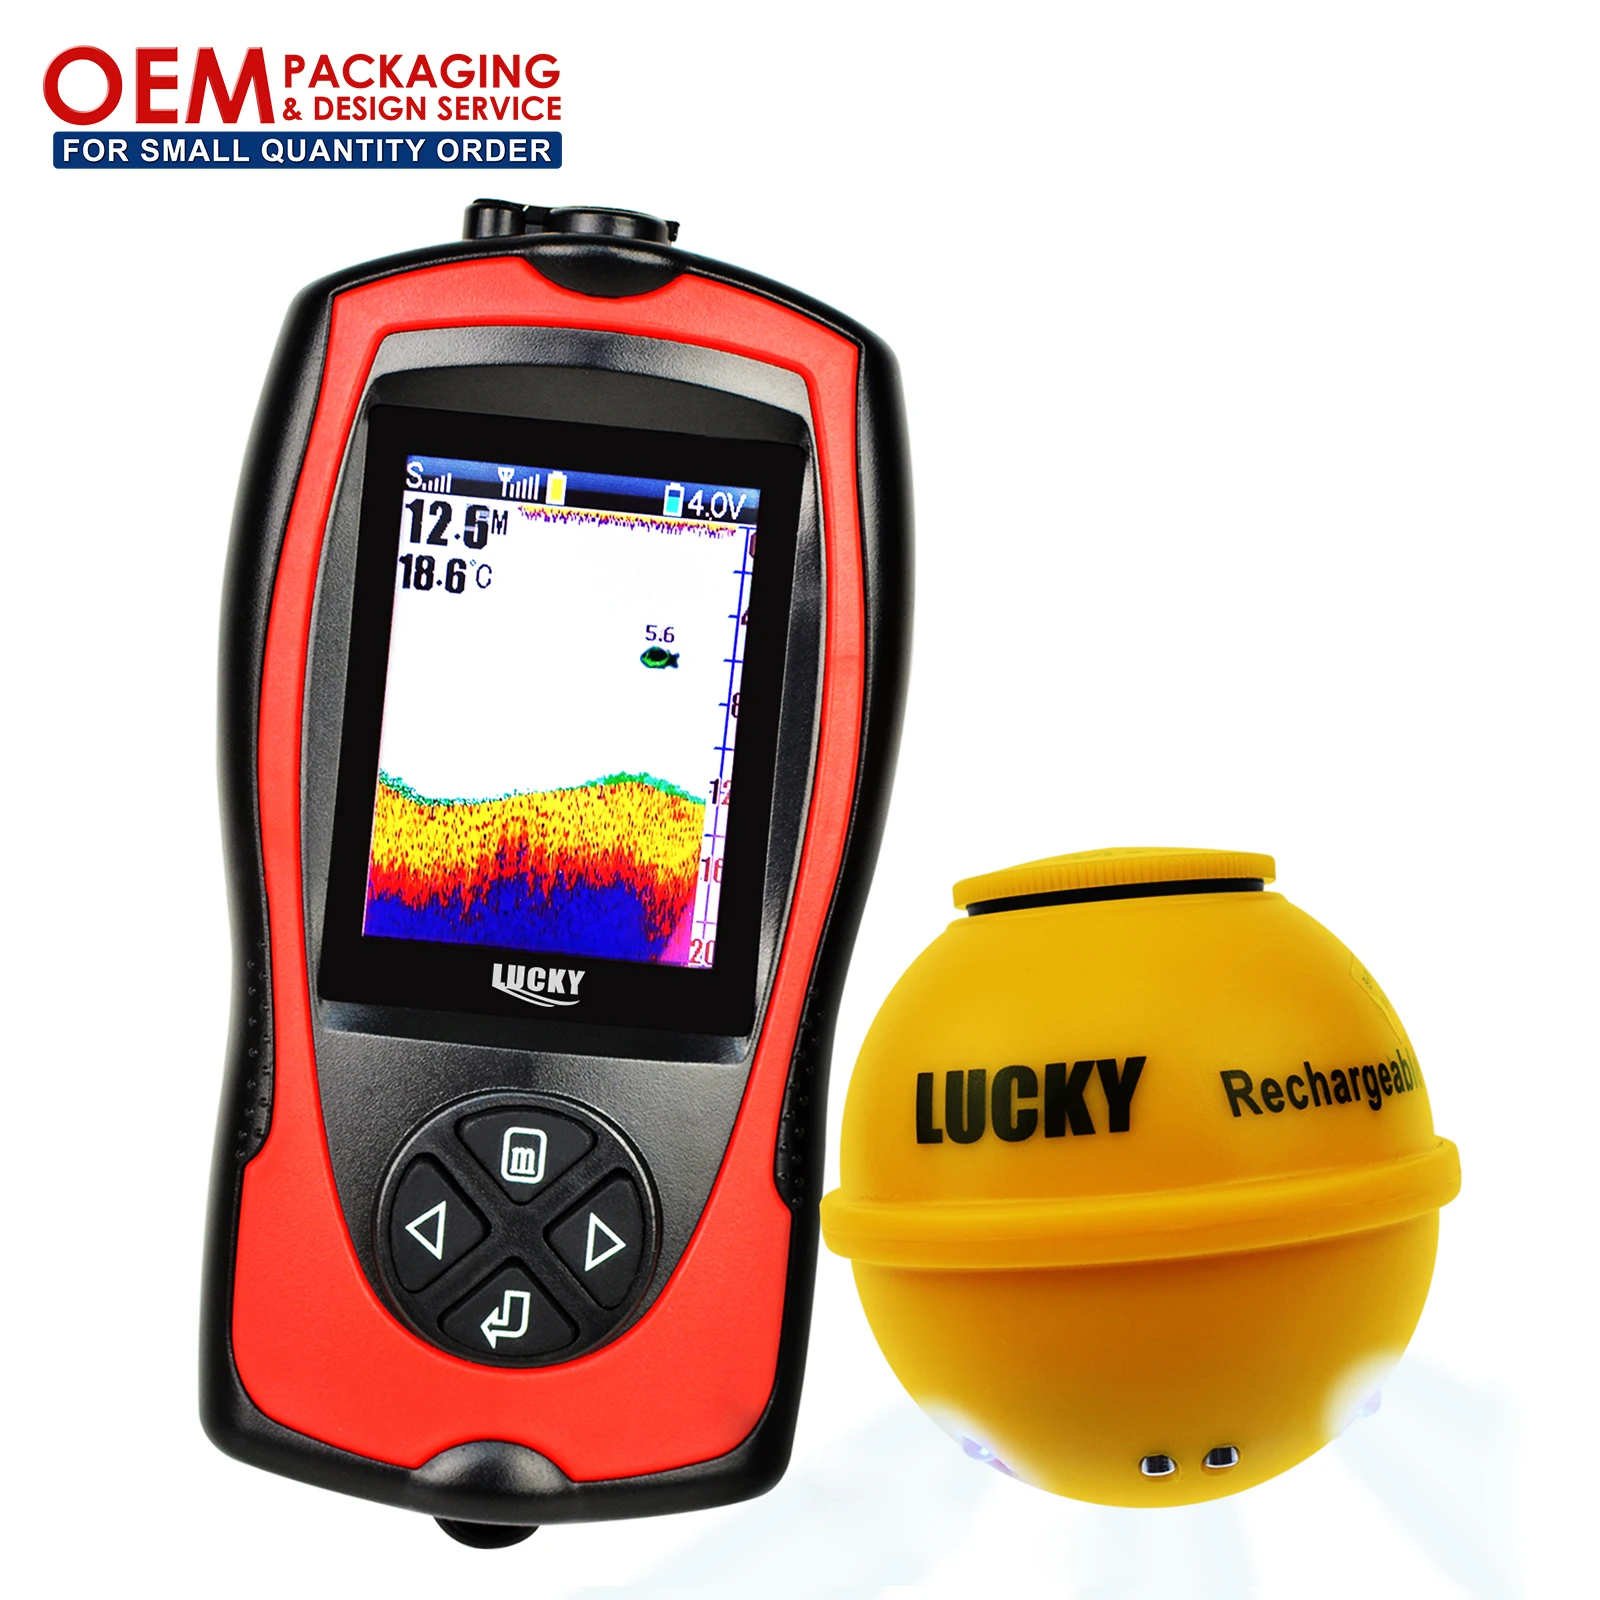 

LUCKY Wireless Fish Finder 45M Depth 60M Sonar Sensor w/ Fish Attractive Light Lamp & Color LCD (OEM Packaging Available)